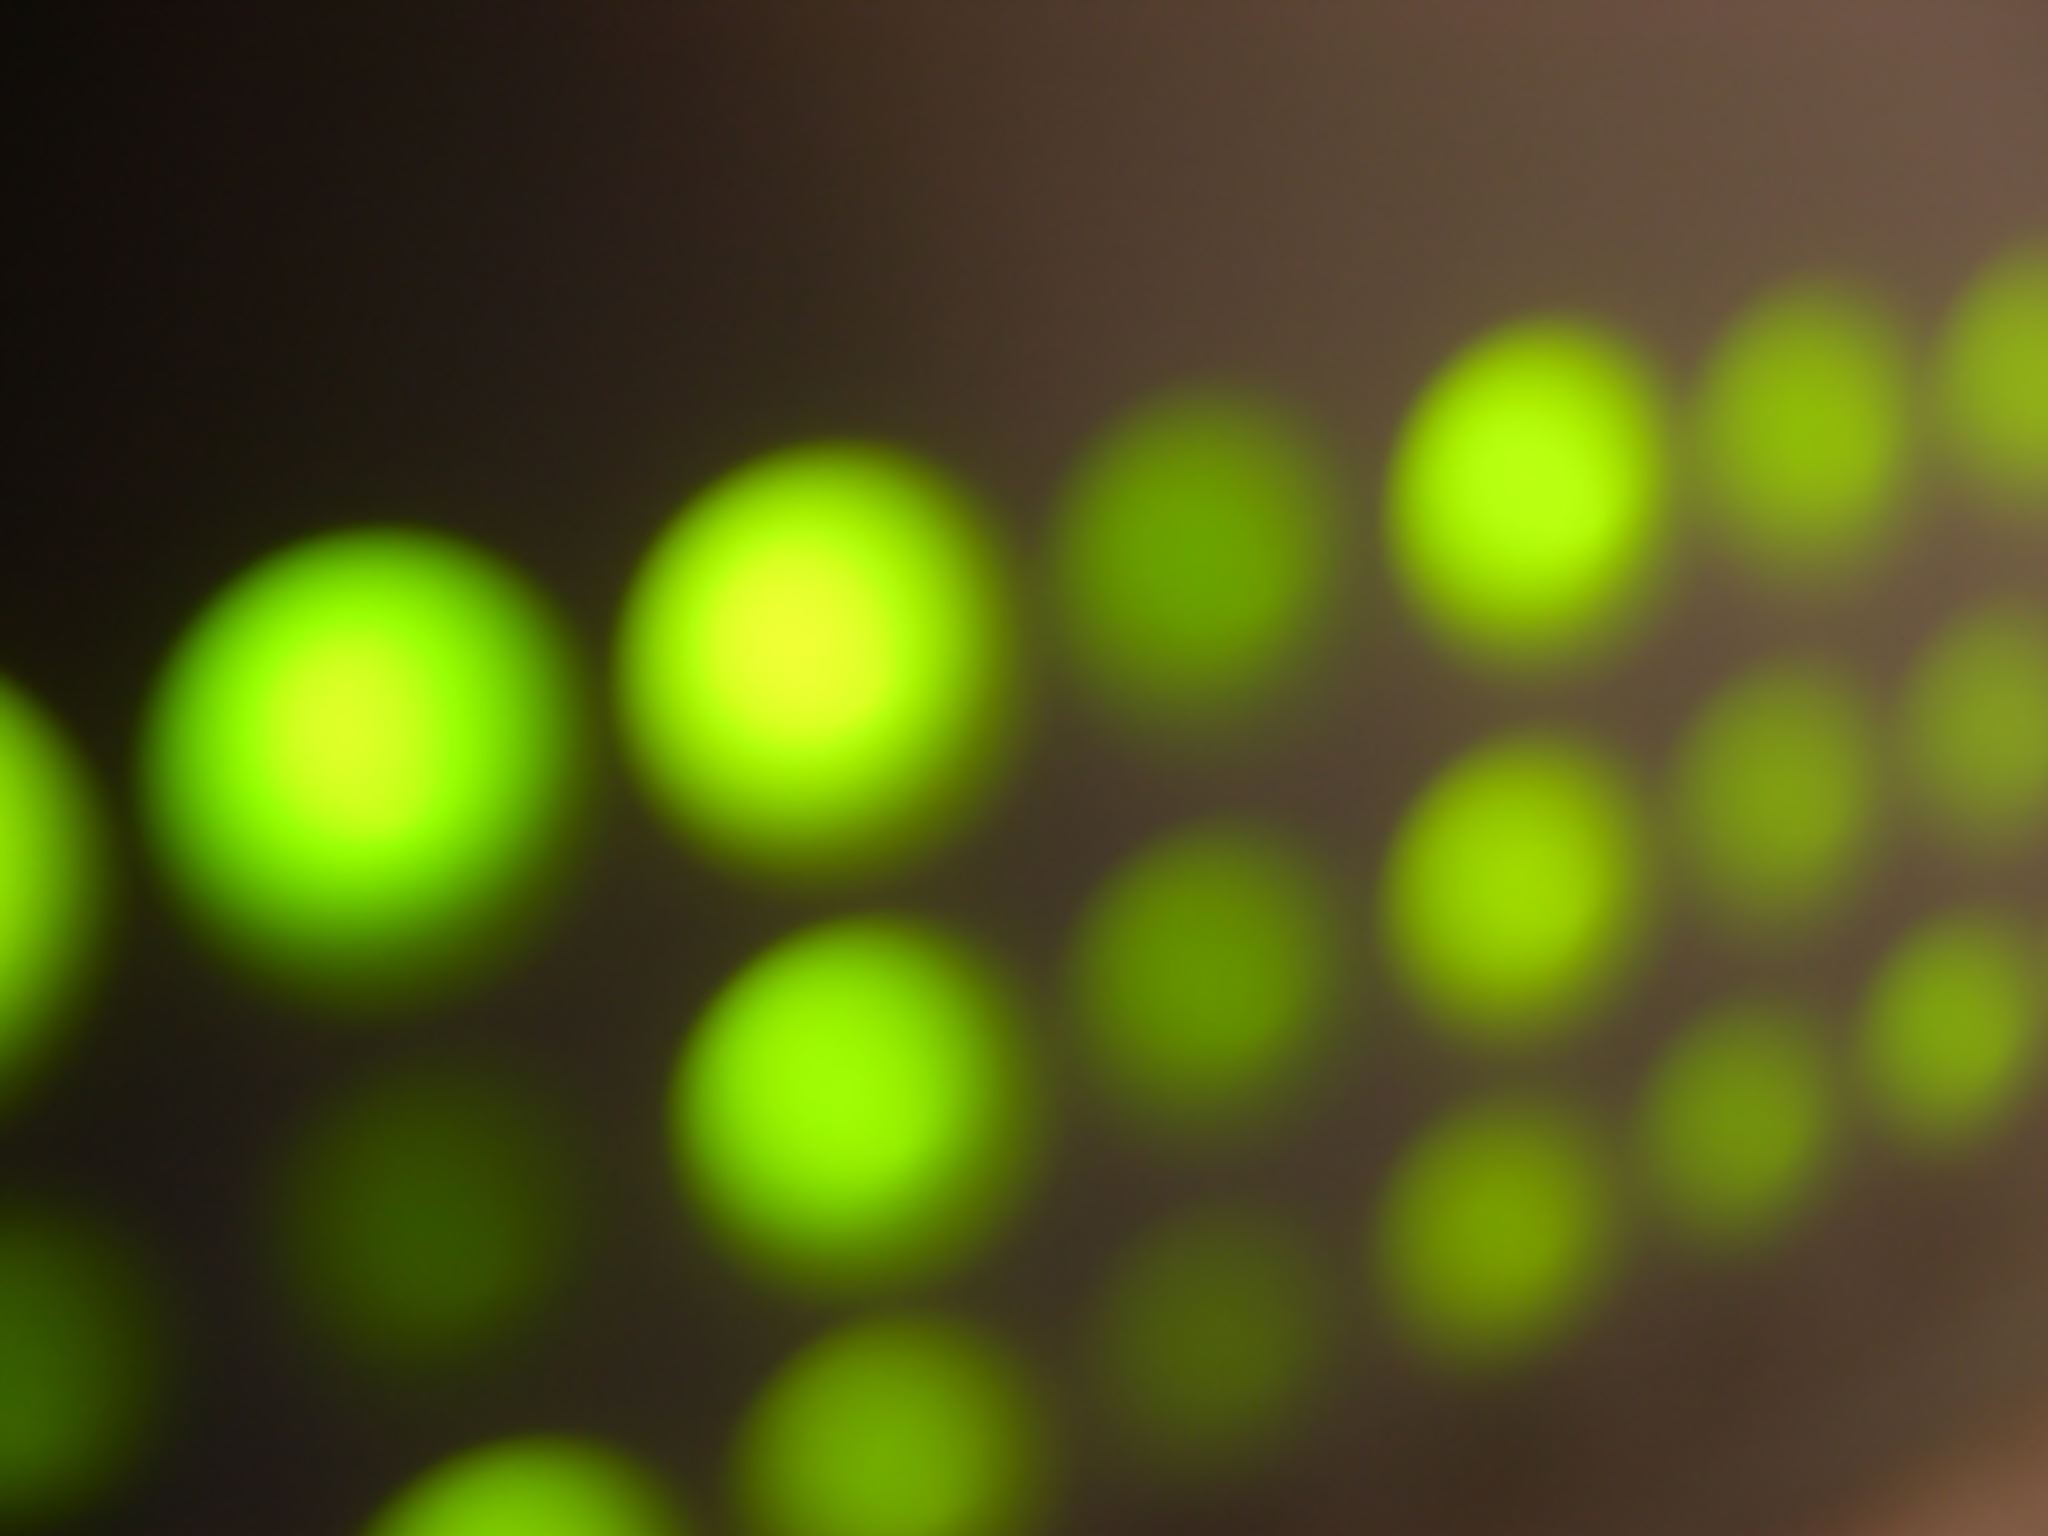 Abstract Green Lights